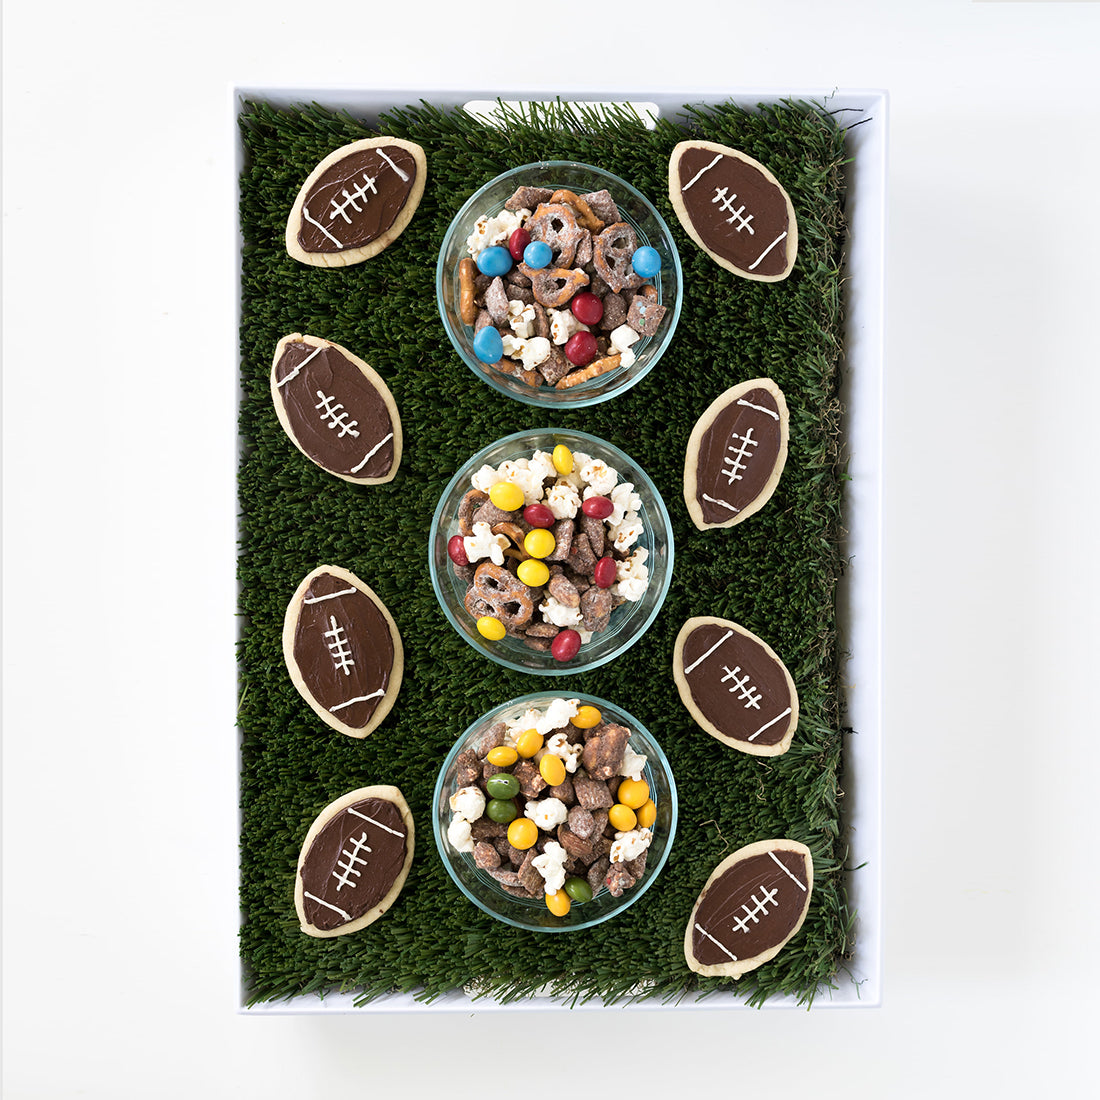 Image from above of three different bowls of Miss Jones Baking Co Confetti Pop Puppy Chow Snack Mix surrounded by football sugar cookies on a turf mat